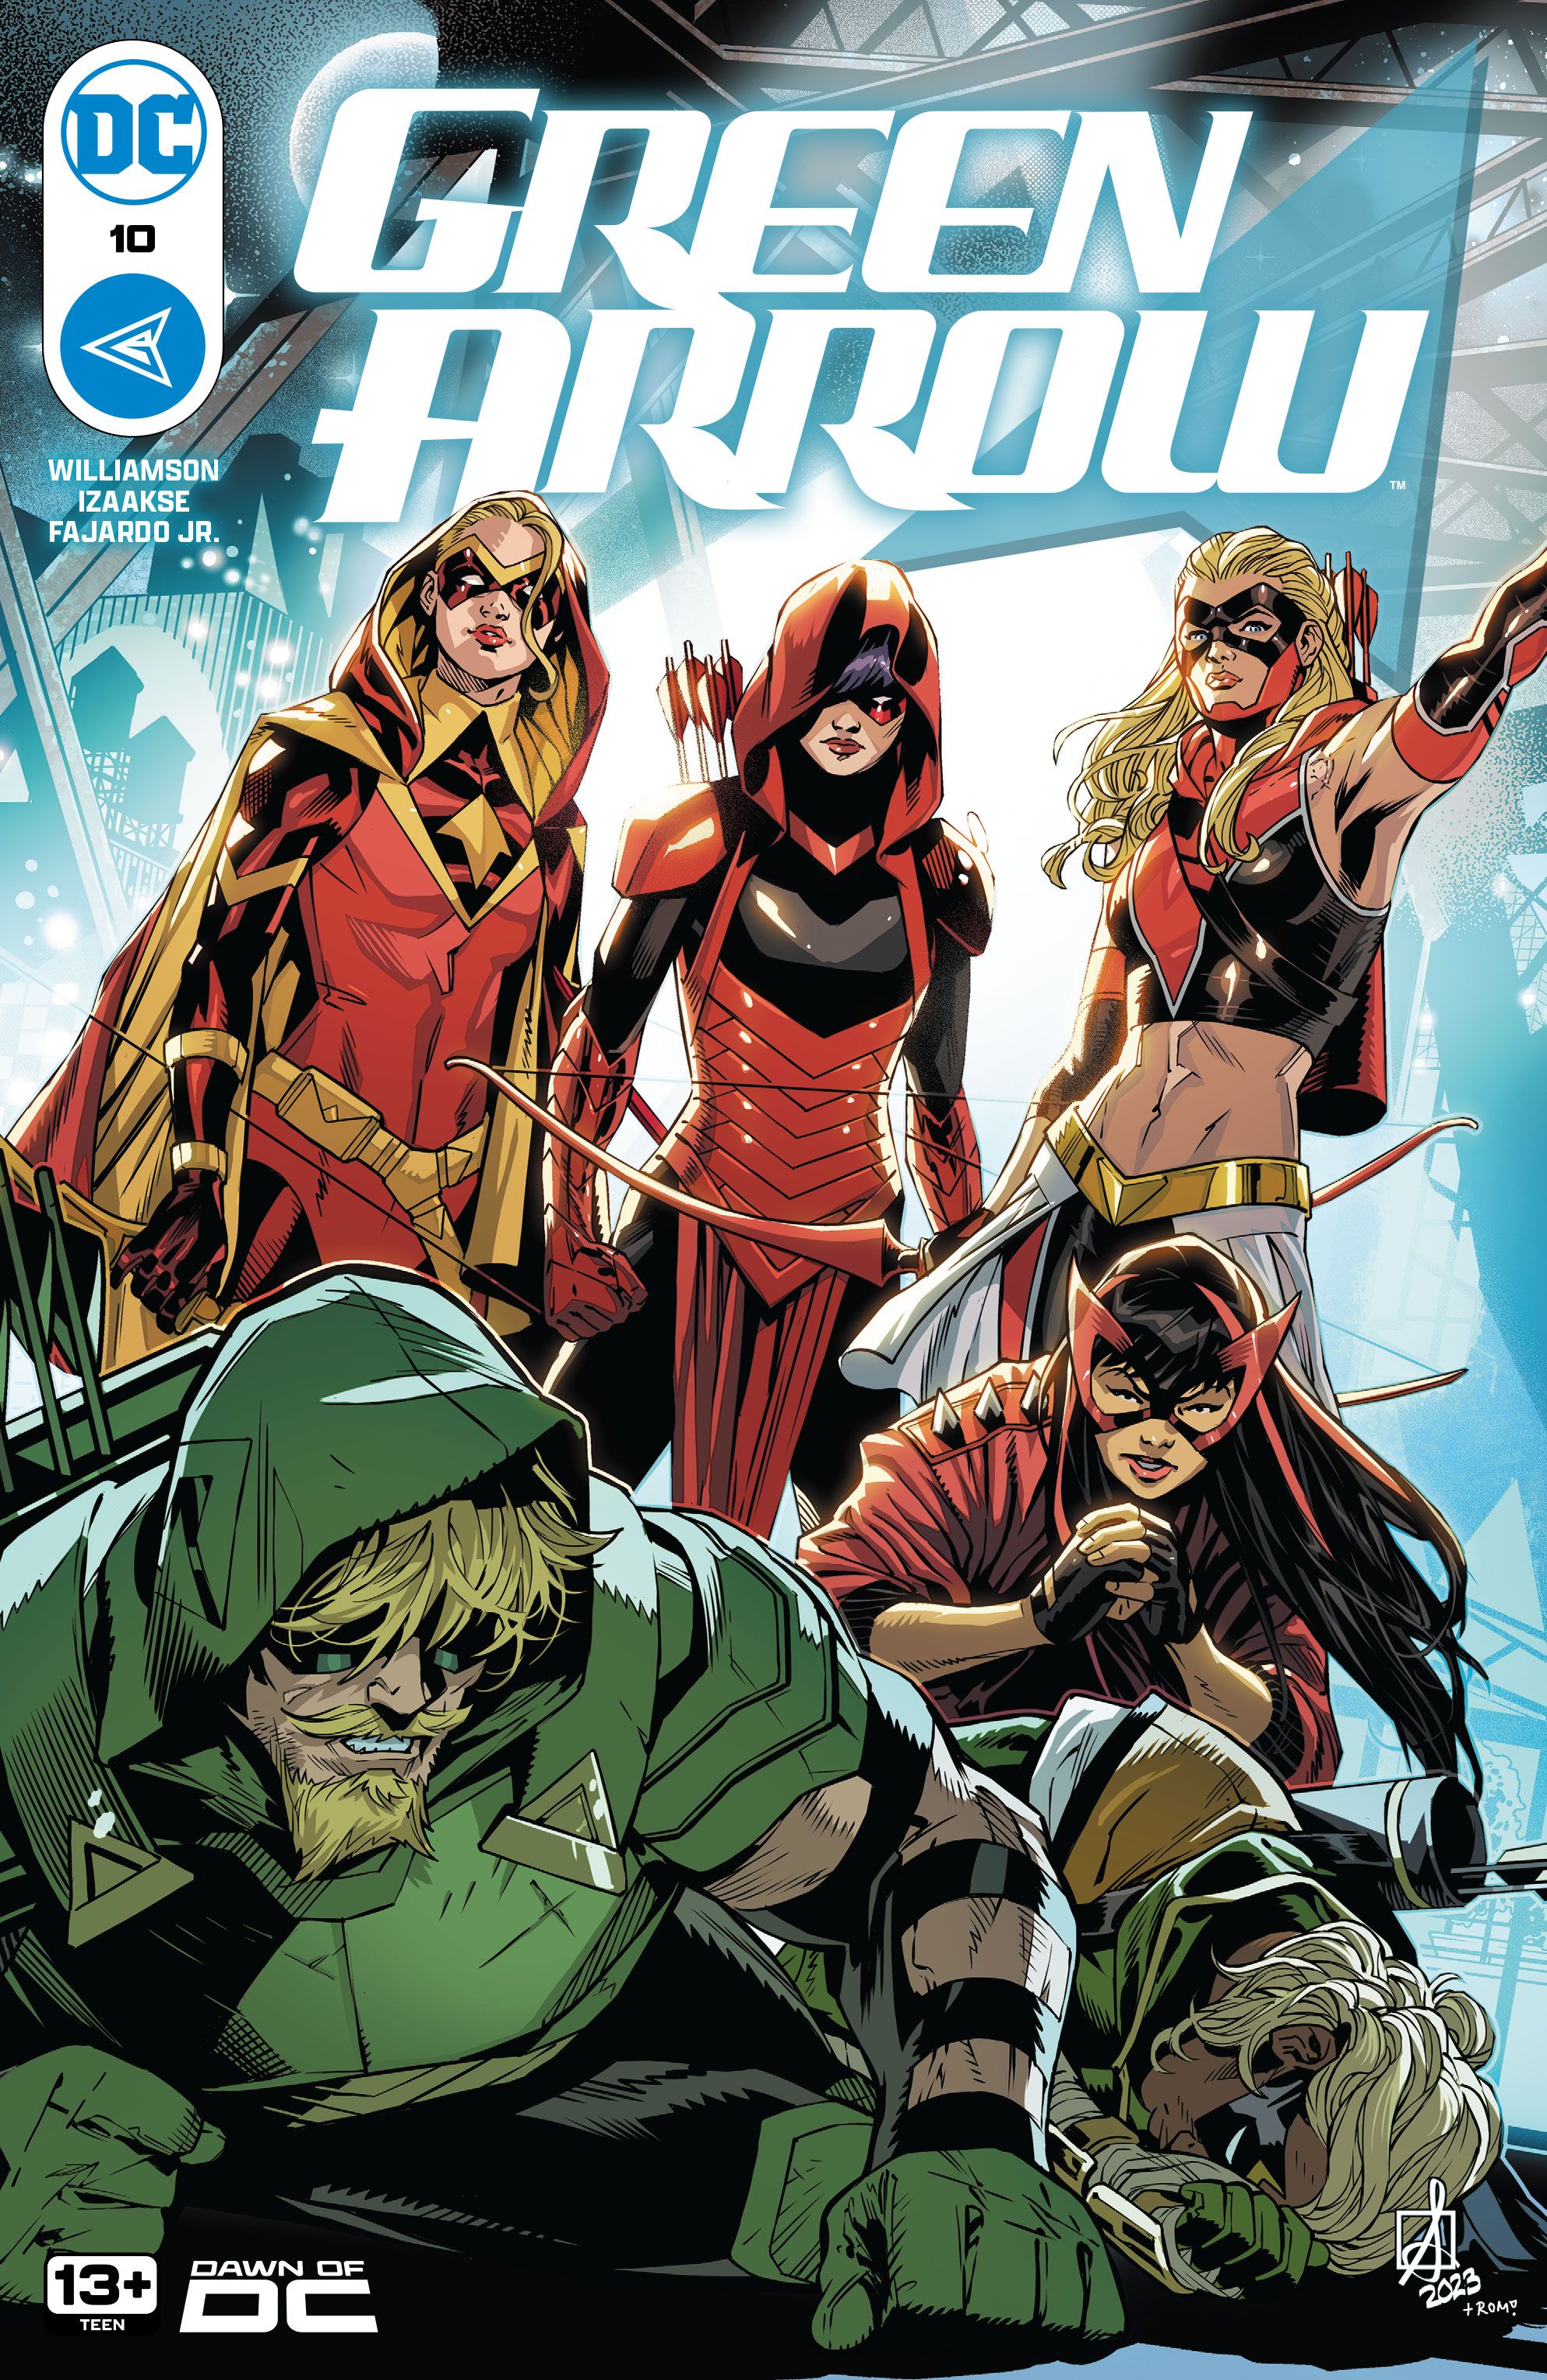 Green Arrow 10 Main Cover: Speedy, Red Arrow, Arrowette, and Red Canary stand menacing above Green Arrow and Connor Hawke.